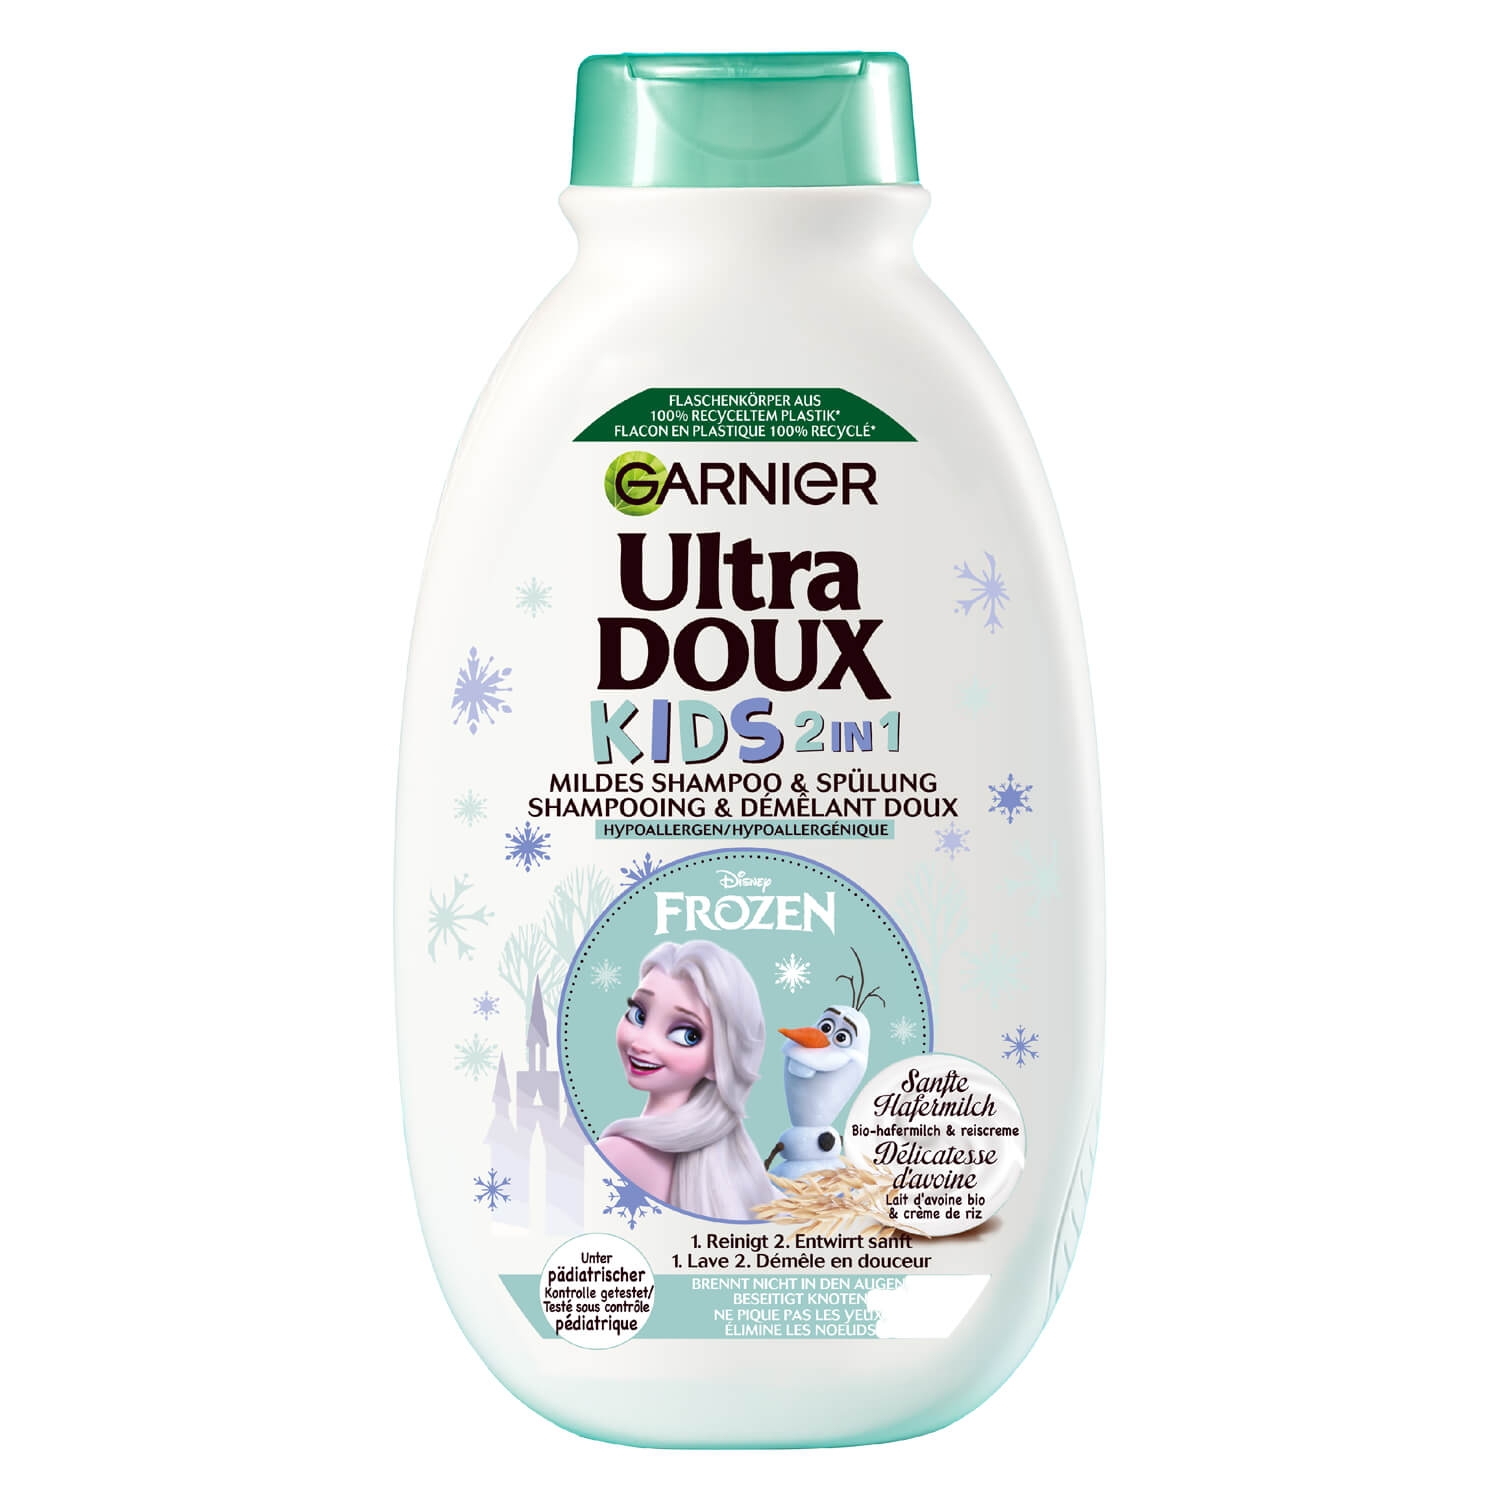 Product image from Ultra Doux Haircare - Kids 2in1 Sanfte Reiscreme & Bio-Hafermilch Shampoo